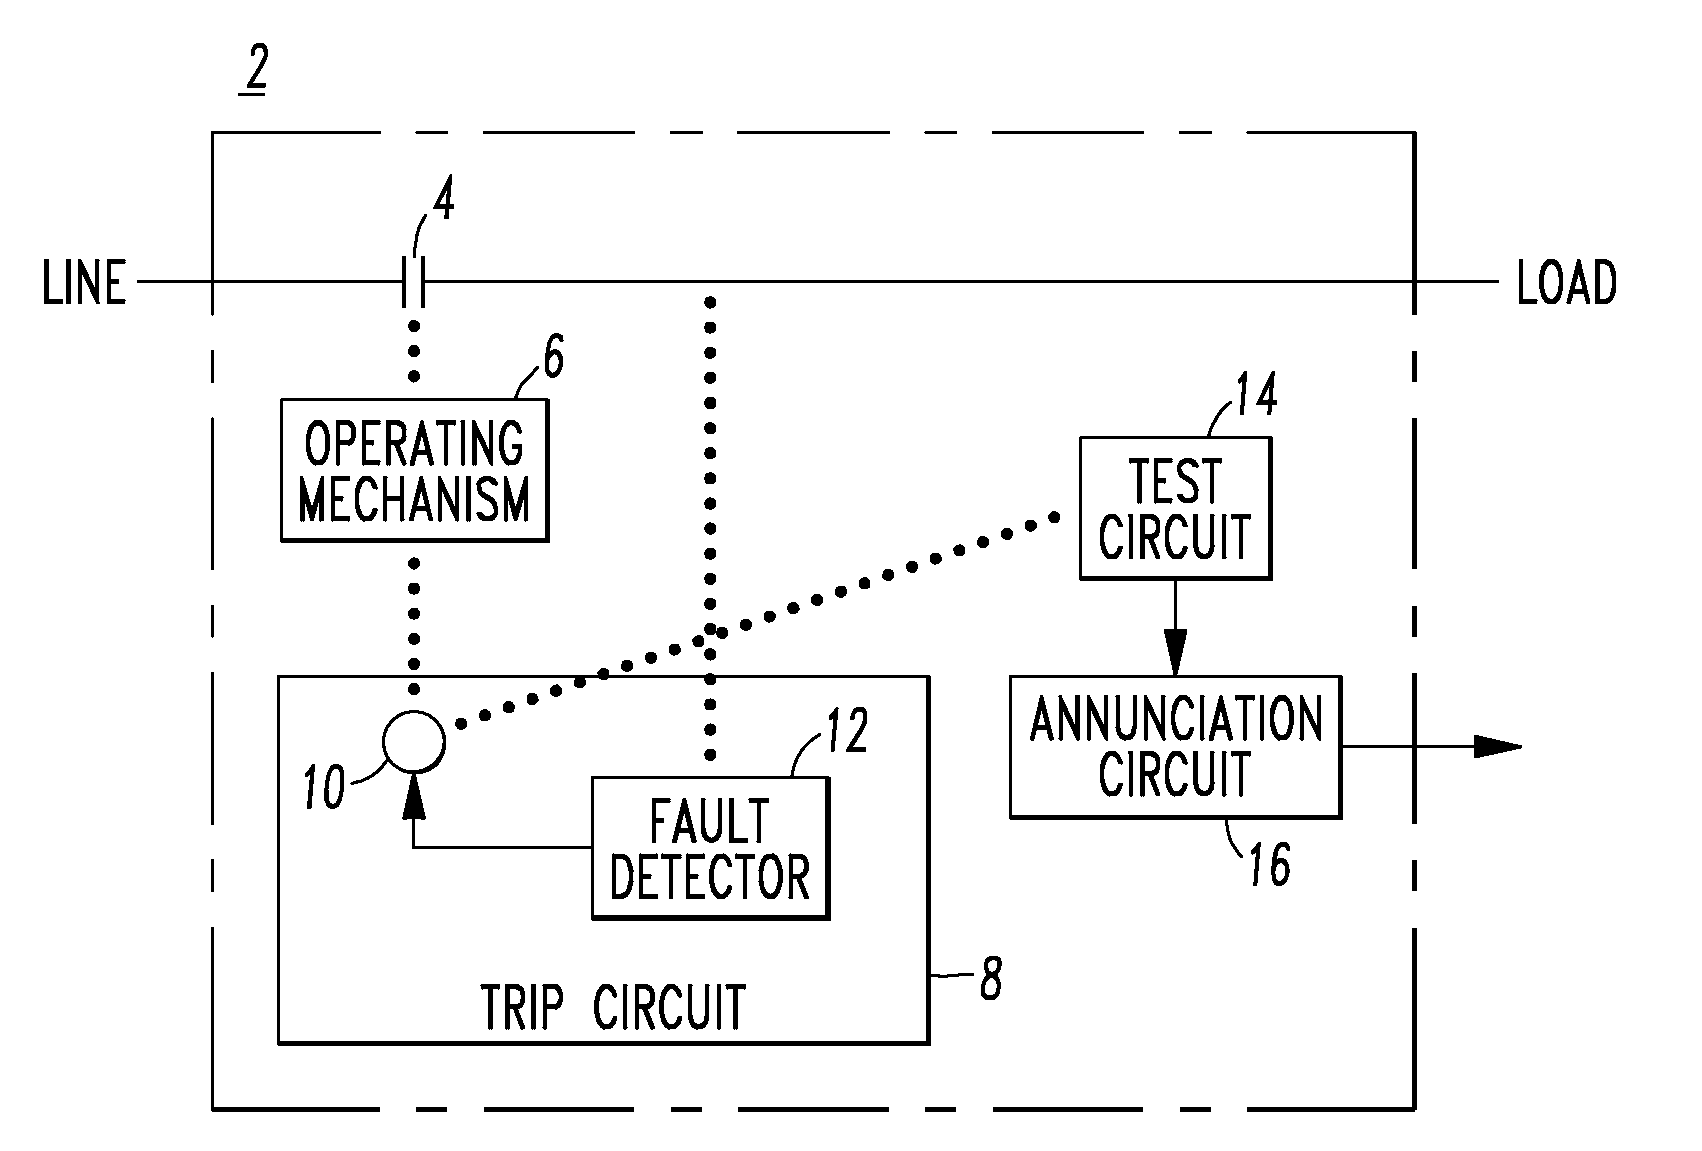 Communication interface apparatus for an electrical distribution panel, and system and electrical distribution panel including the same